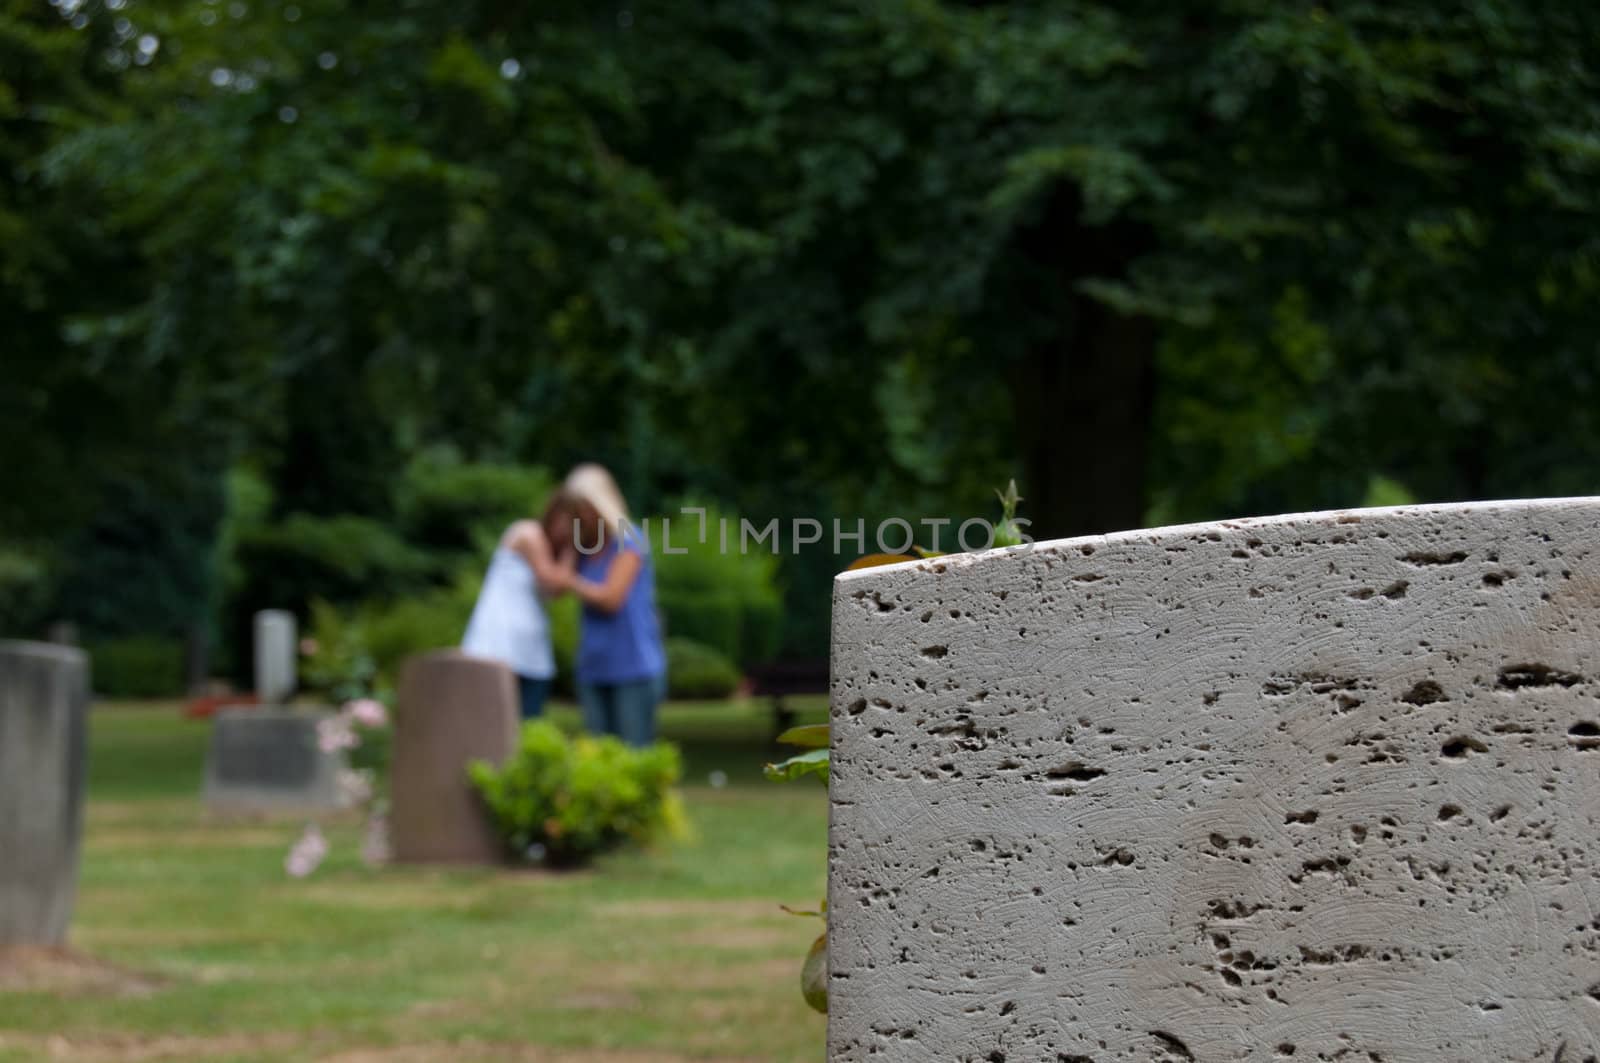 Mourning at the grave by franz_hein